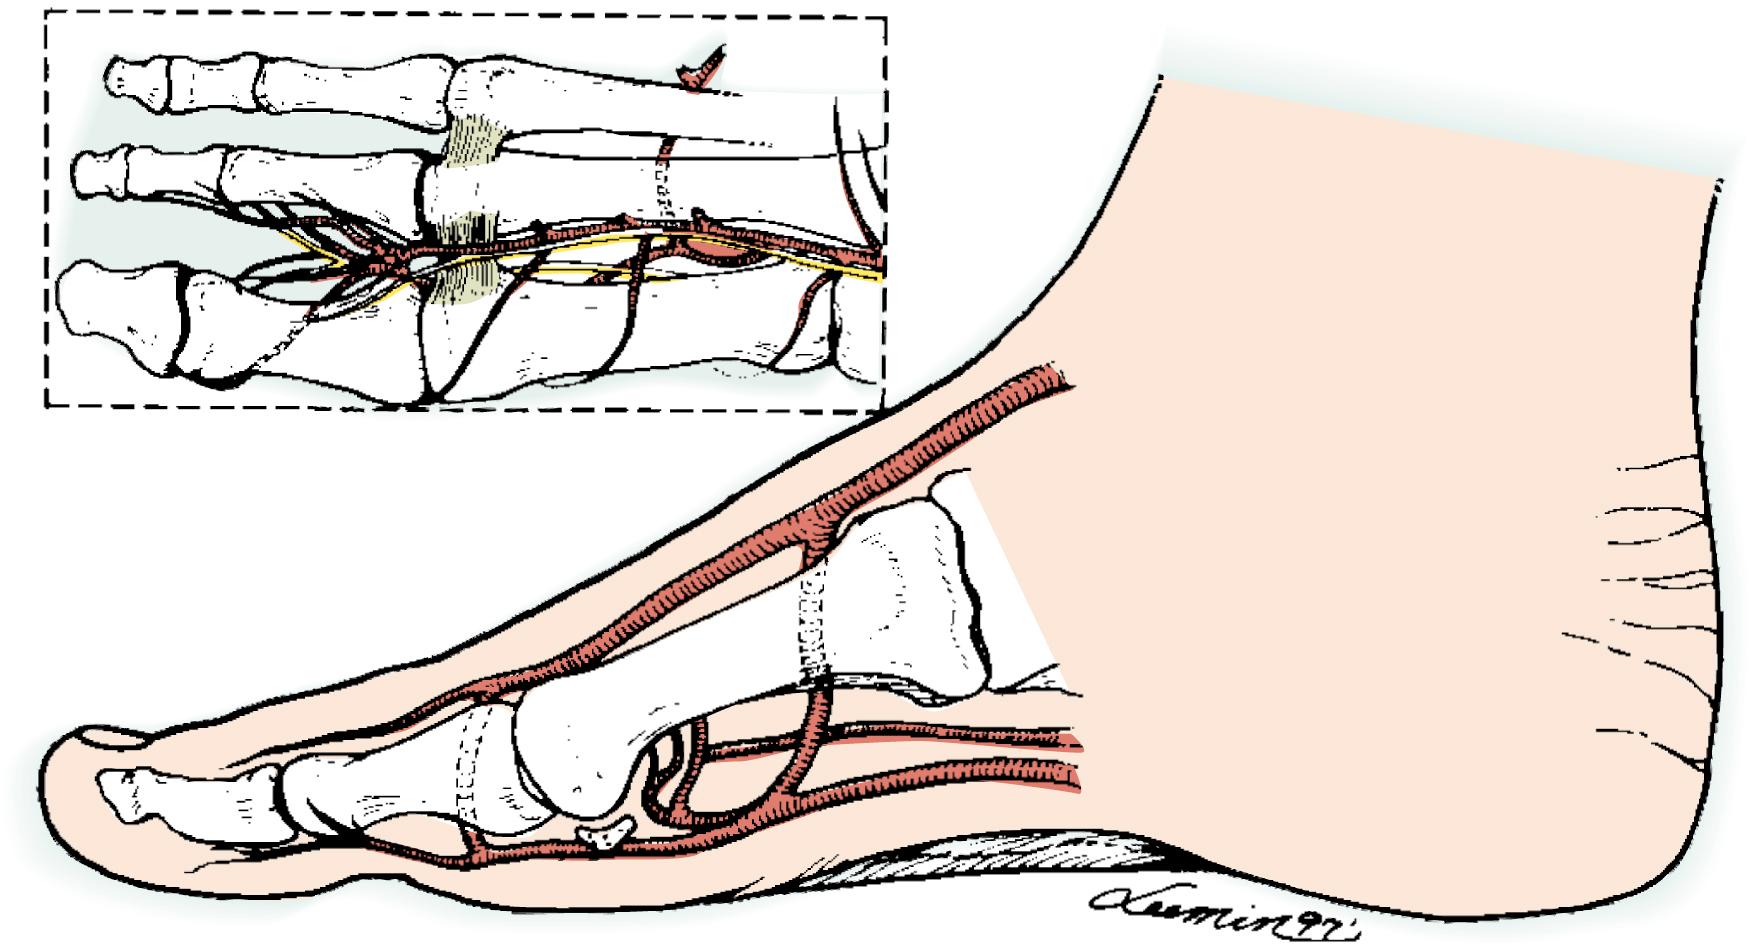 Fig. 47.11, Anatomic relationship between the first dorsal metatarsal artery over the intermetatarsal ligament and the first plantar metatarsal artery. Communicating branches are present in the web space distally and in the base between the first and second metatarsal bones (also known as the deep perforator or proximal communicating artery).